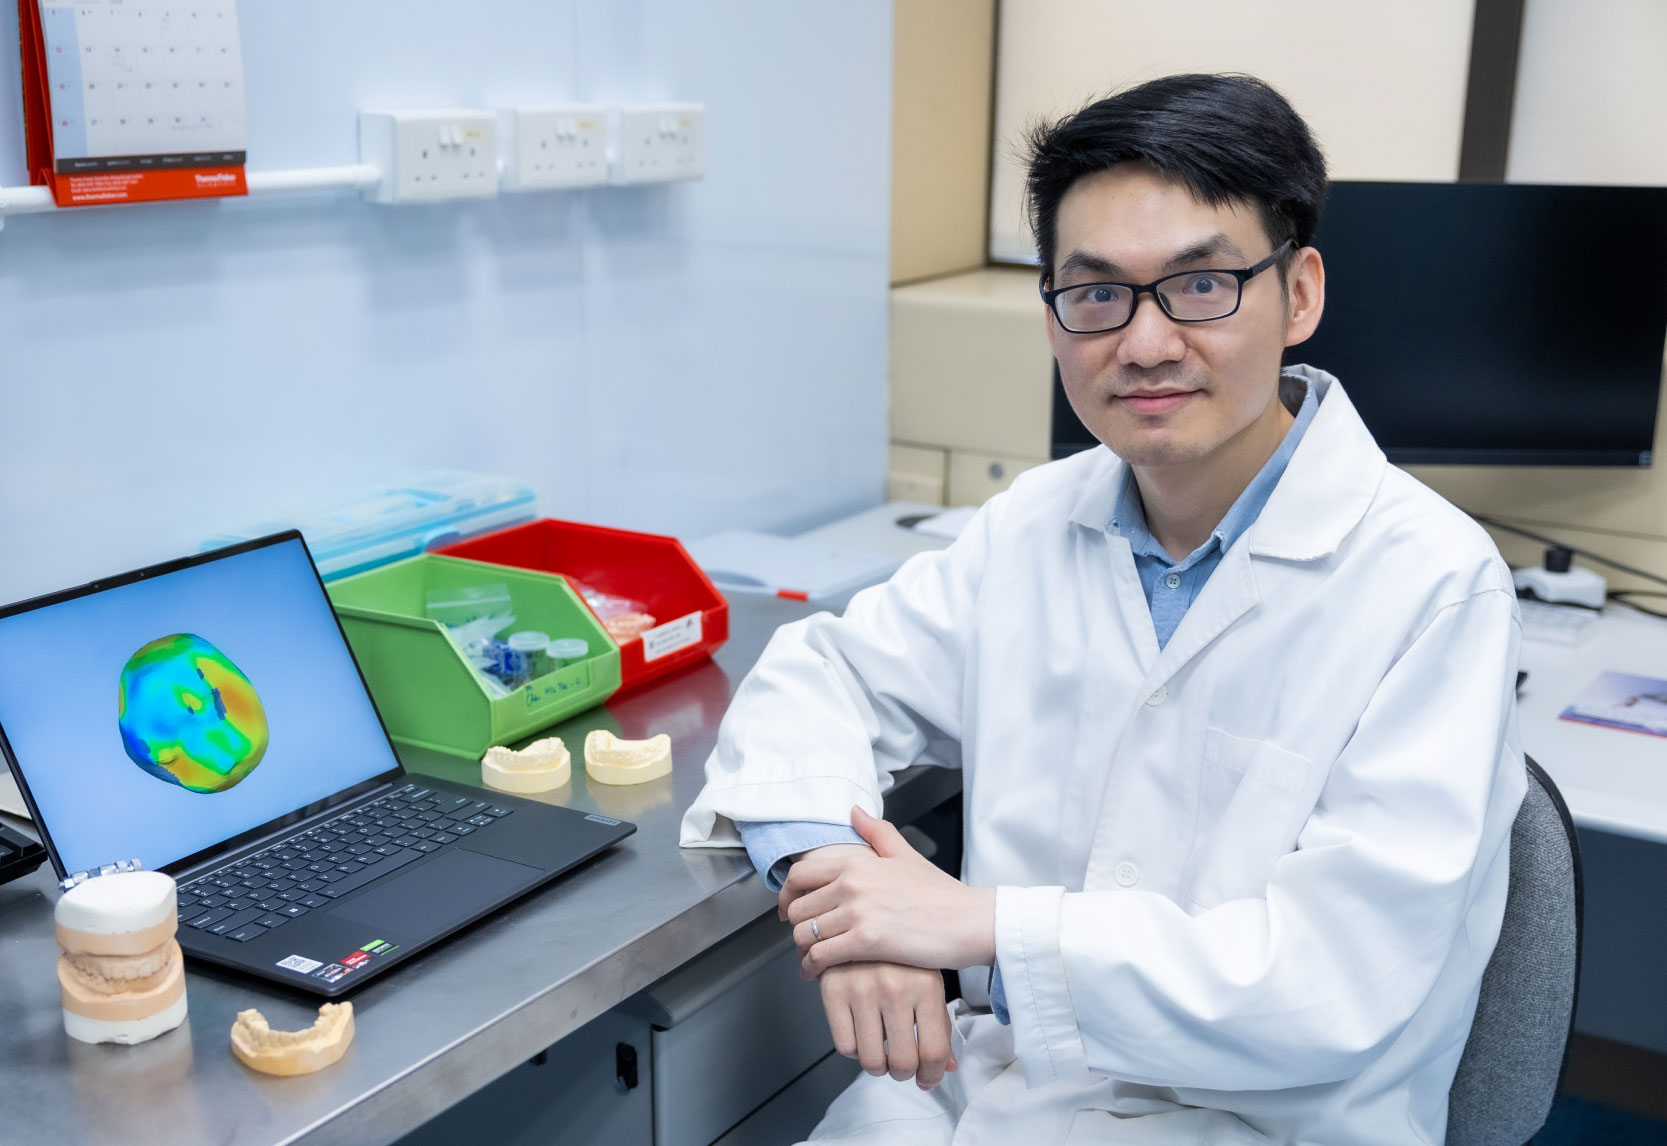 HKU Dentistry develops core technologies using generative AI in smart manufacturing of dental crowns